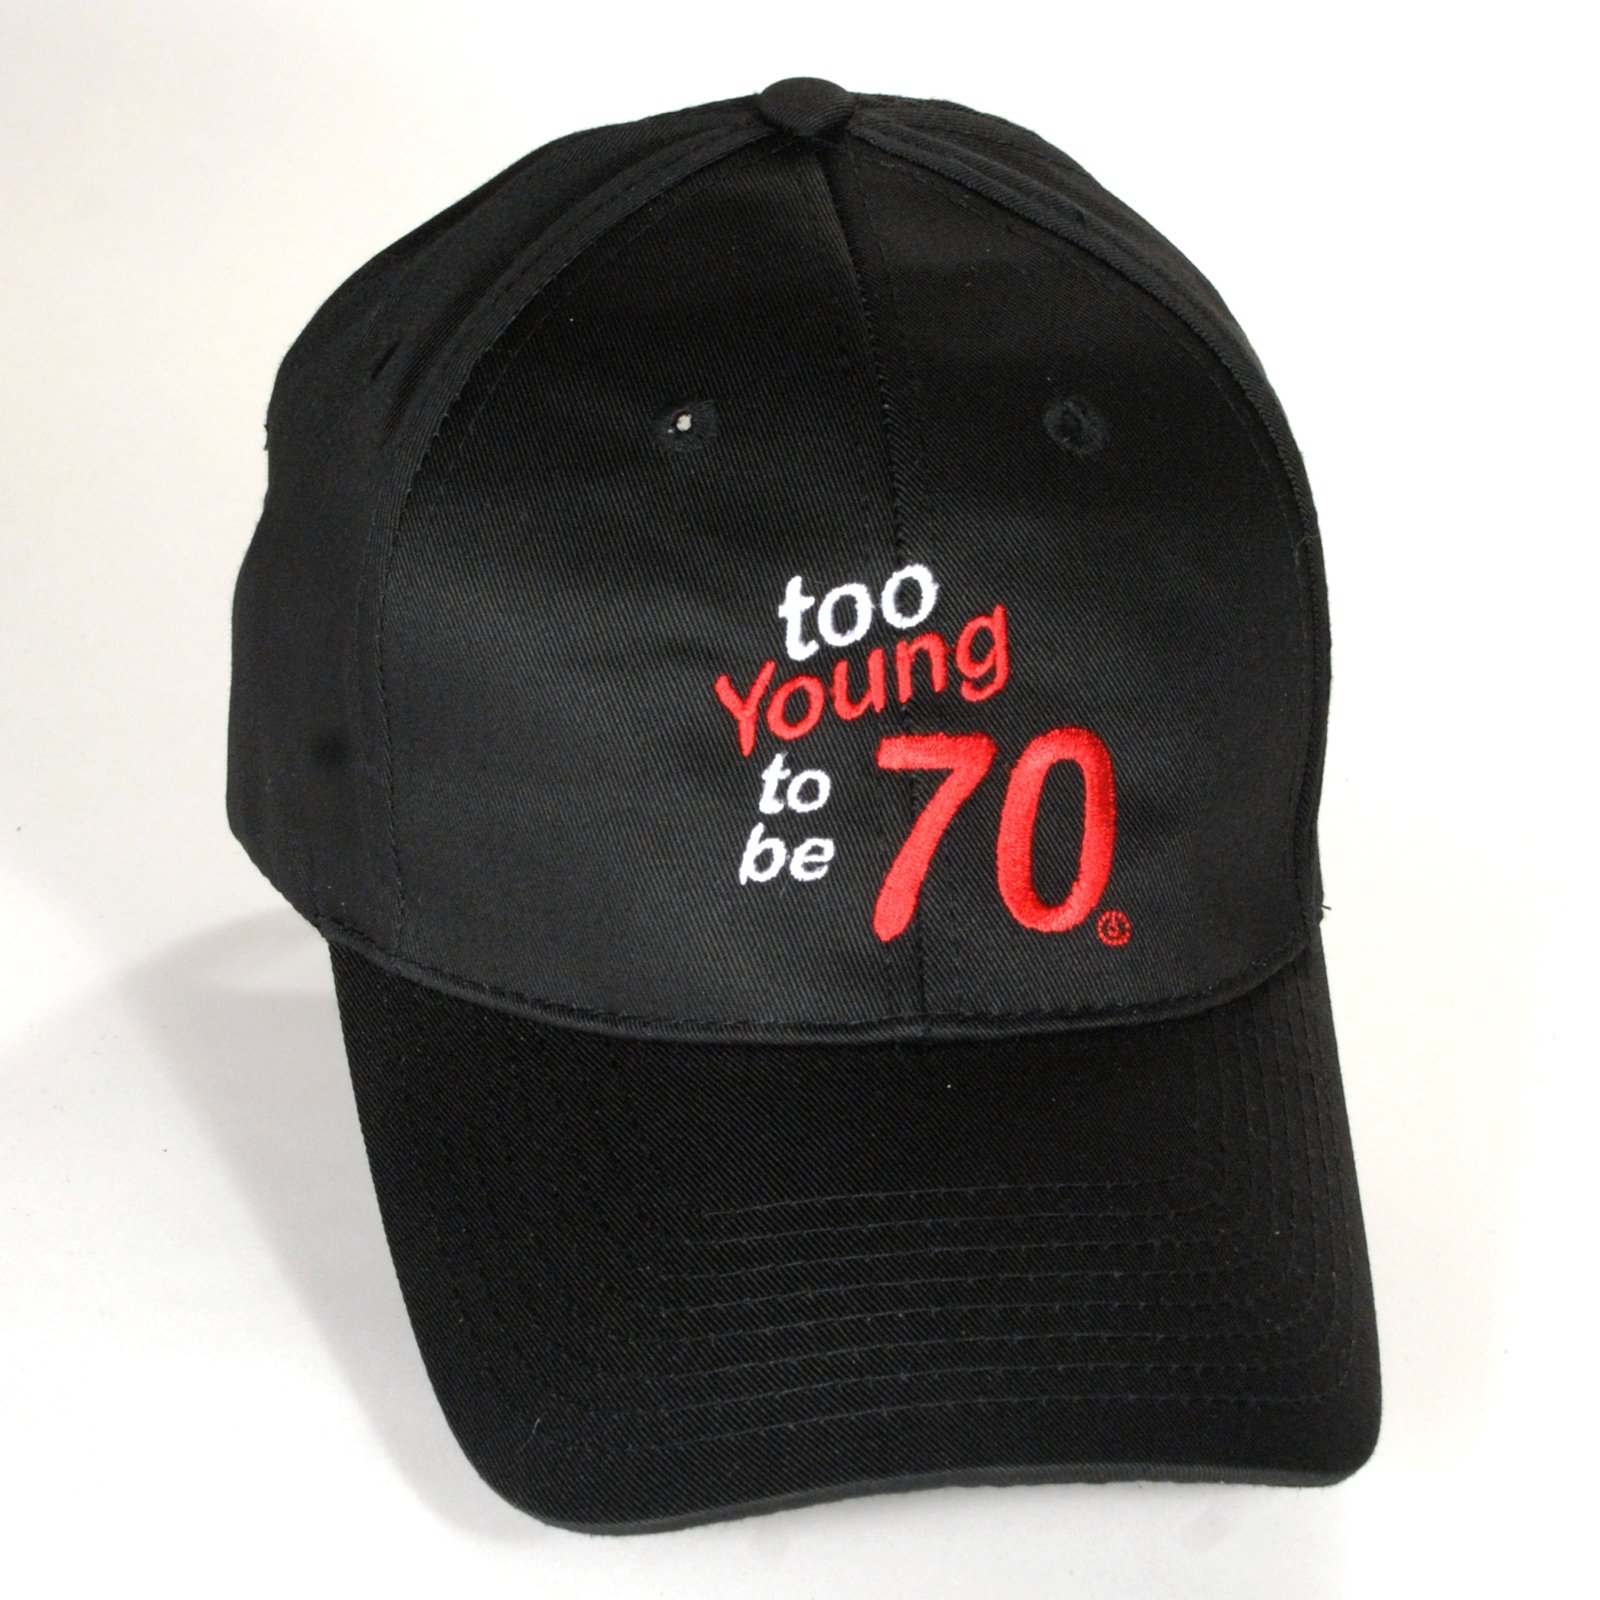 Too Young to be 70 Cap